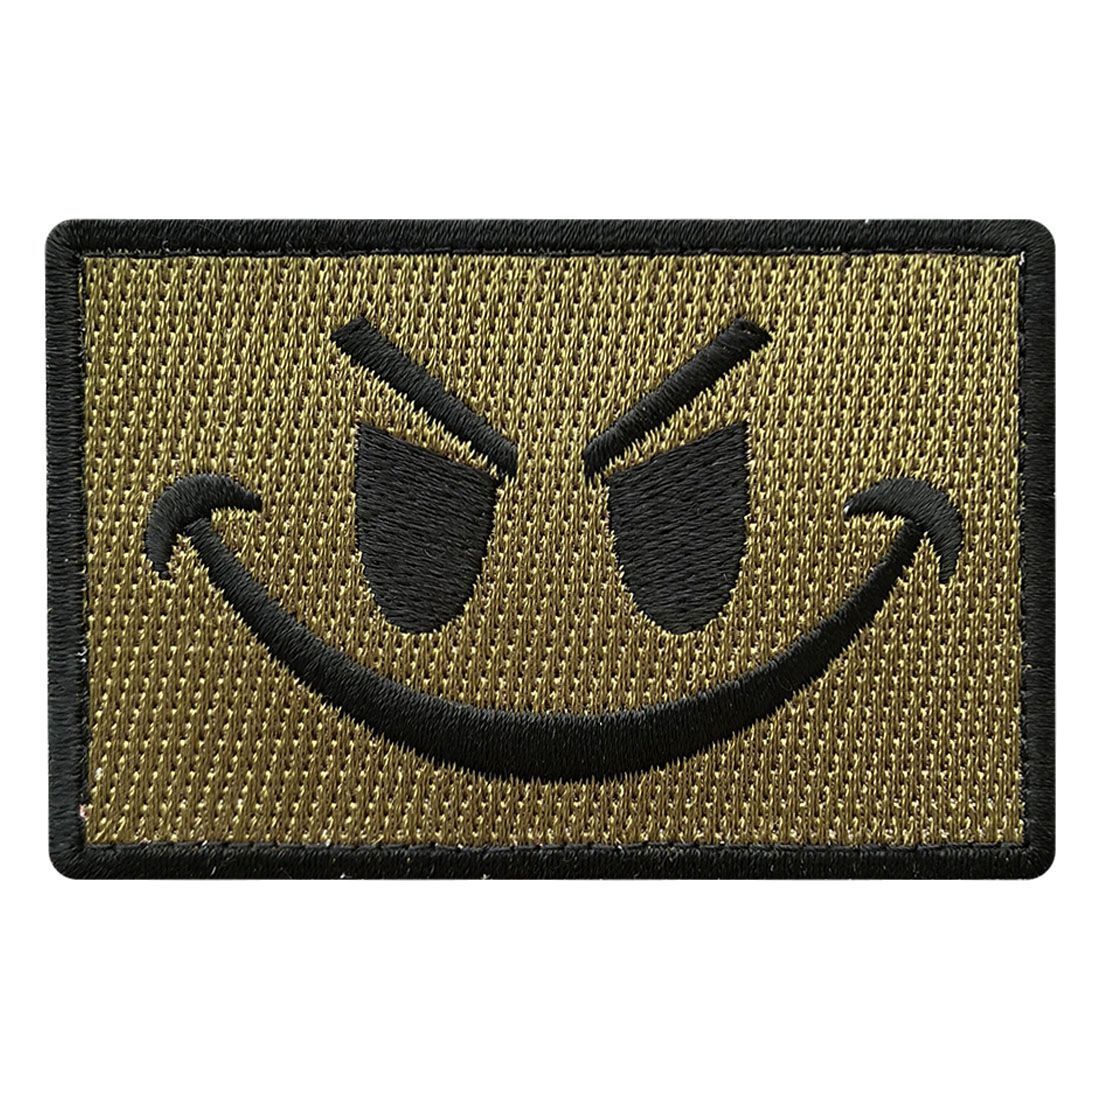 Hook Evil Smiley Face Tactical Patch [3.0 X 2.0 inch MSF-10]